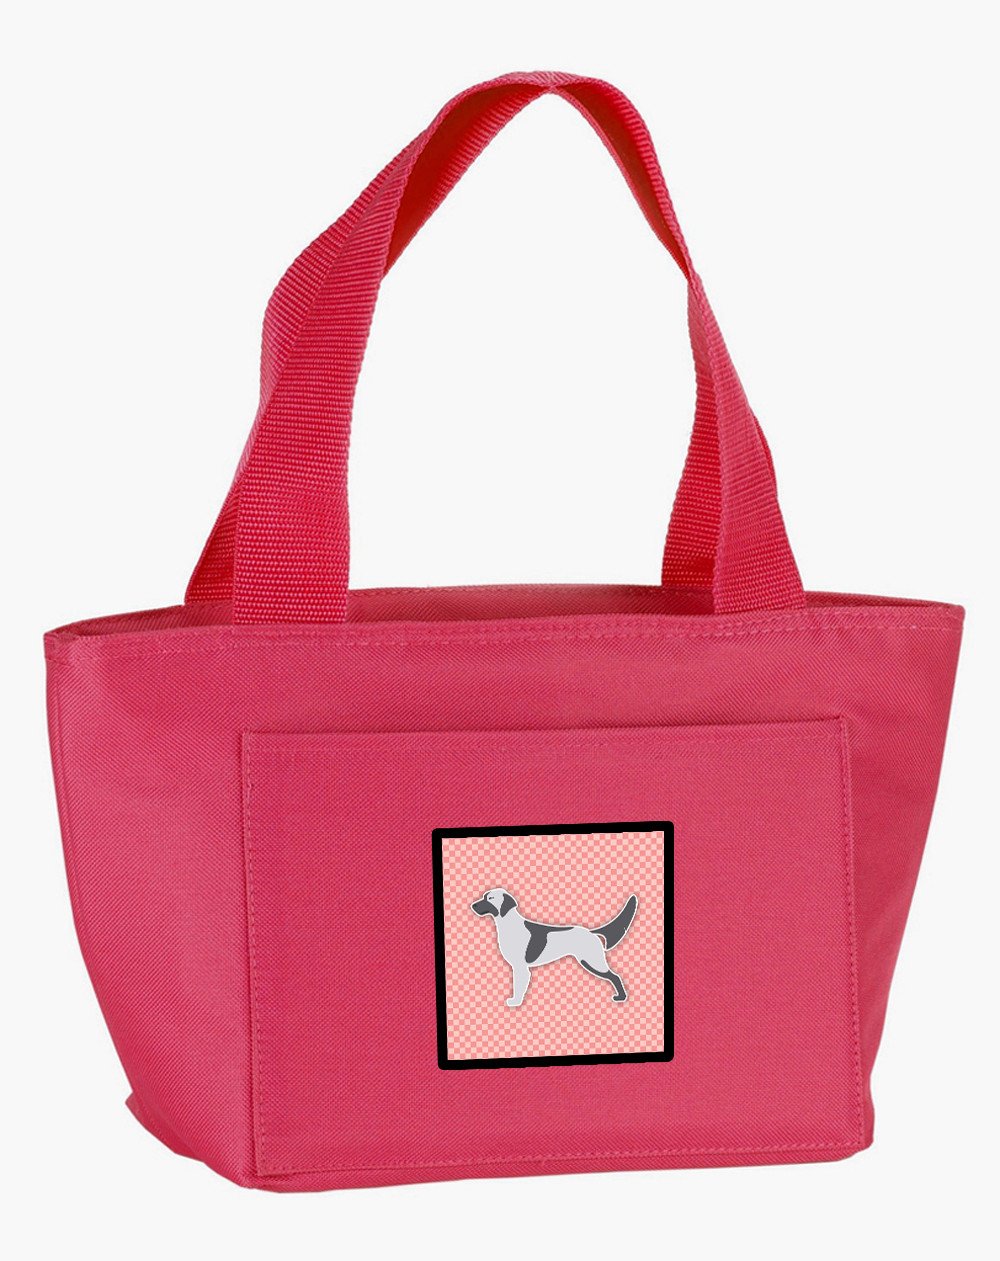 English Setter Checkerboard Pink Lunch Bag BB3581PK-8808 by Caroline's Treasures